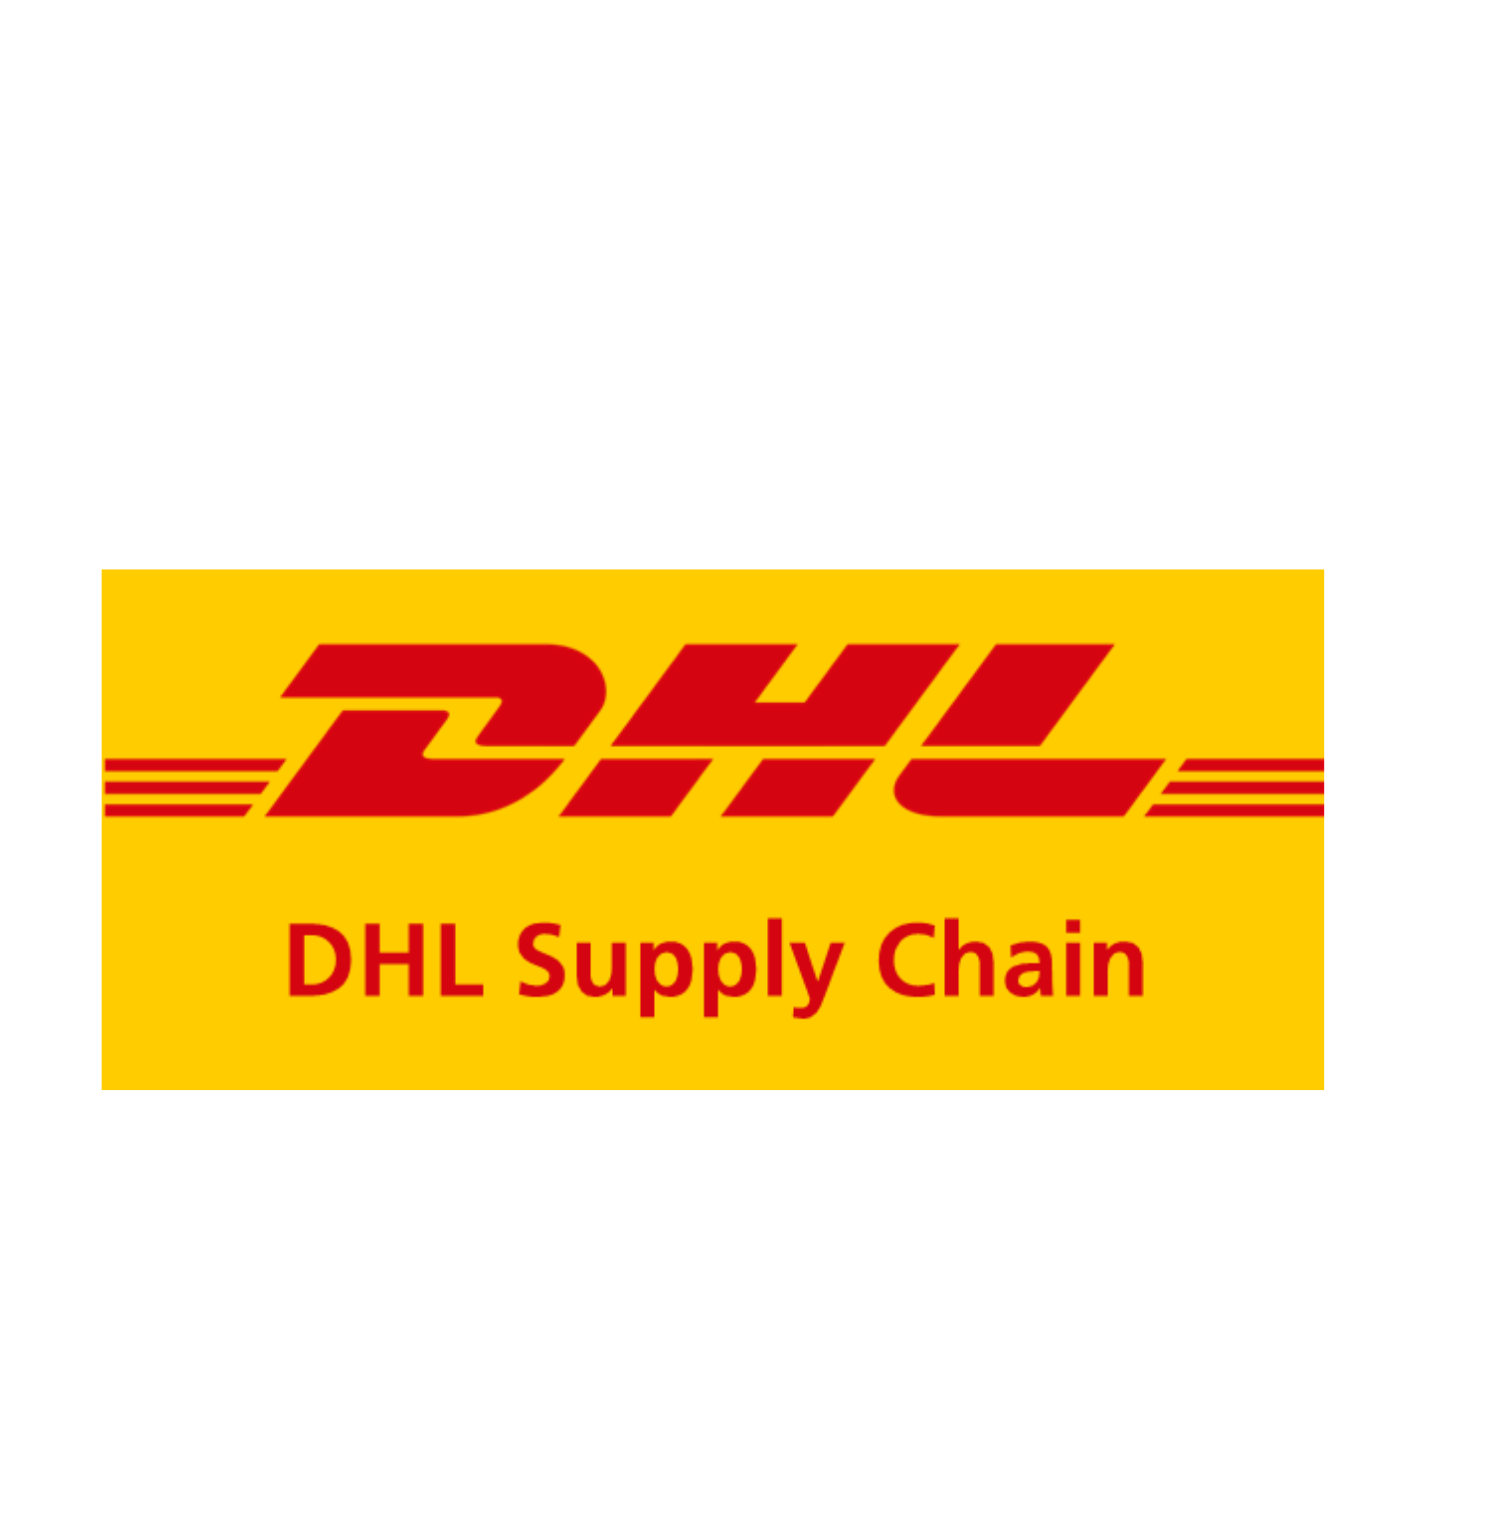 About Dhl Supply Chain Clipart Large Size Png Image Pikpng | Images and ...